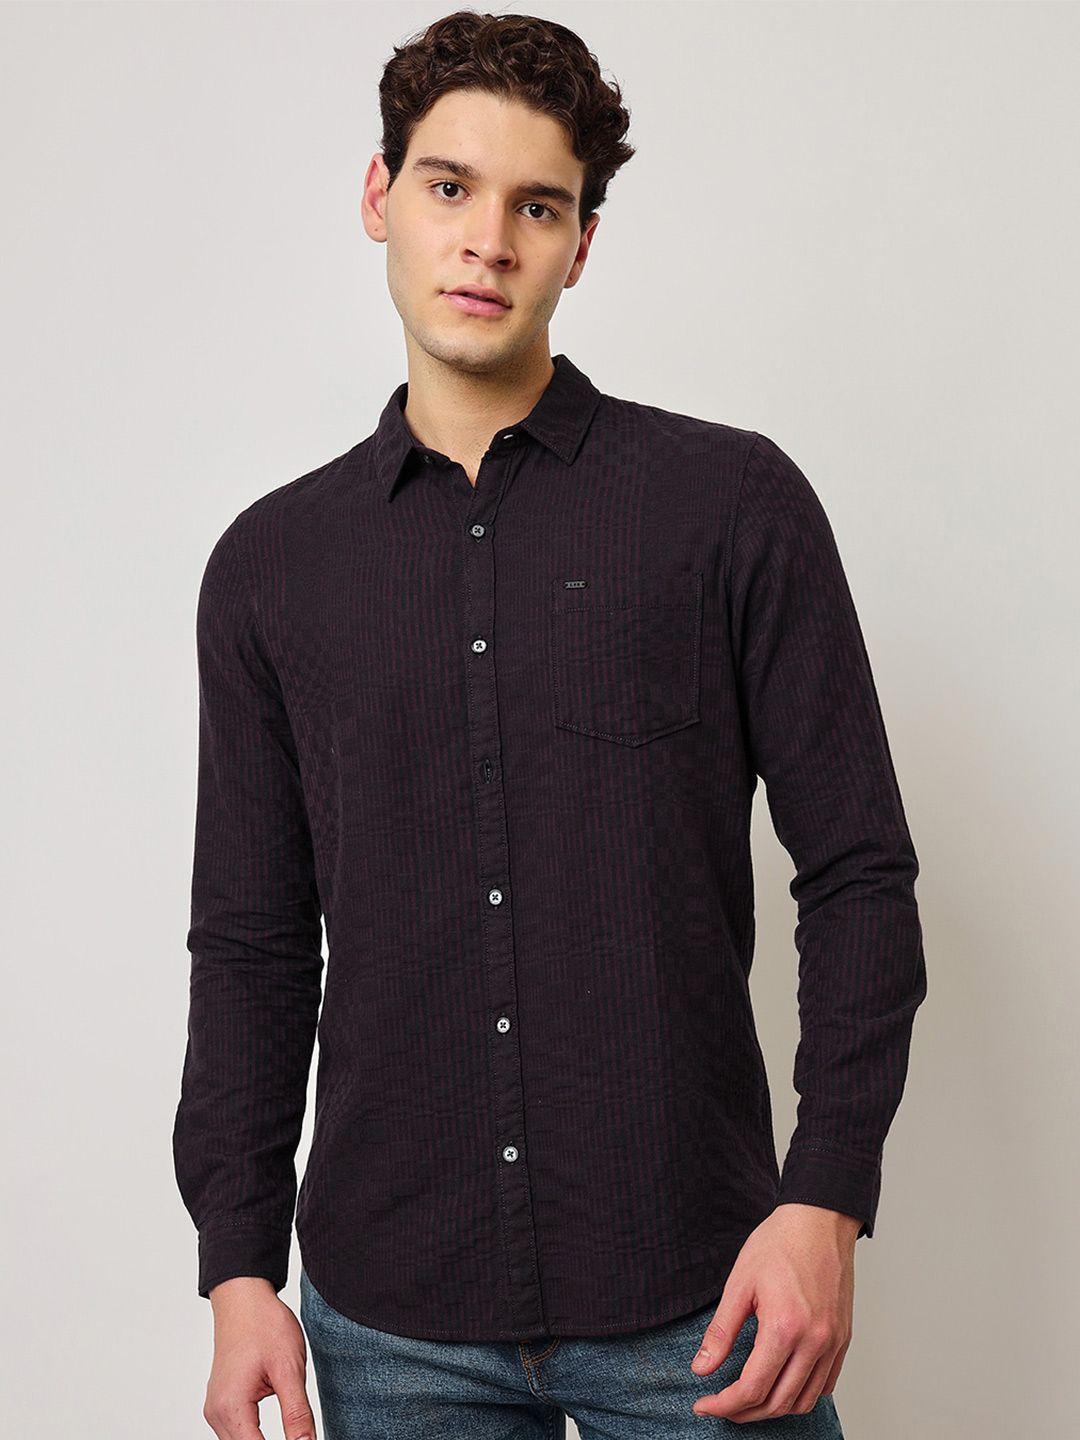 lee vertical striped slim fit cotton casual shirt